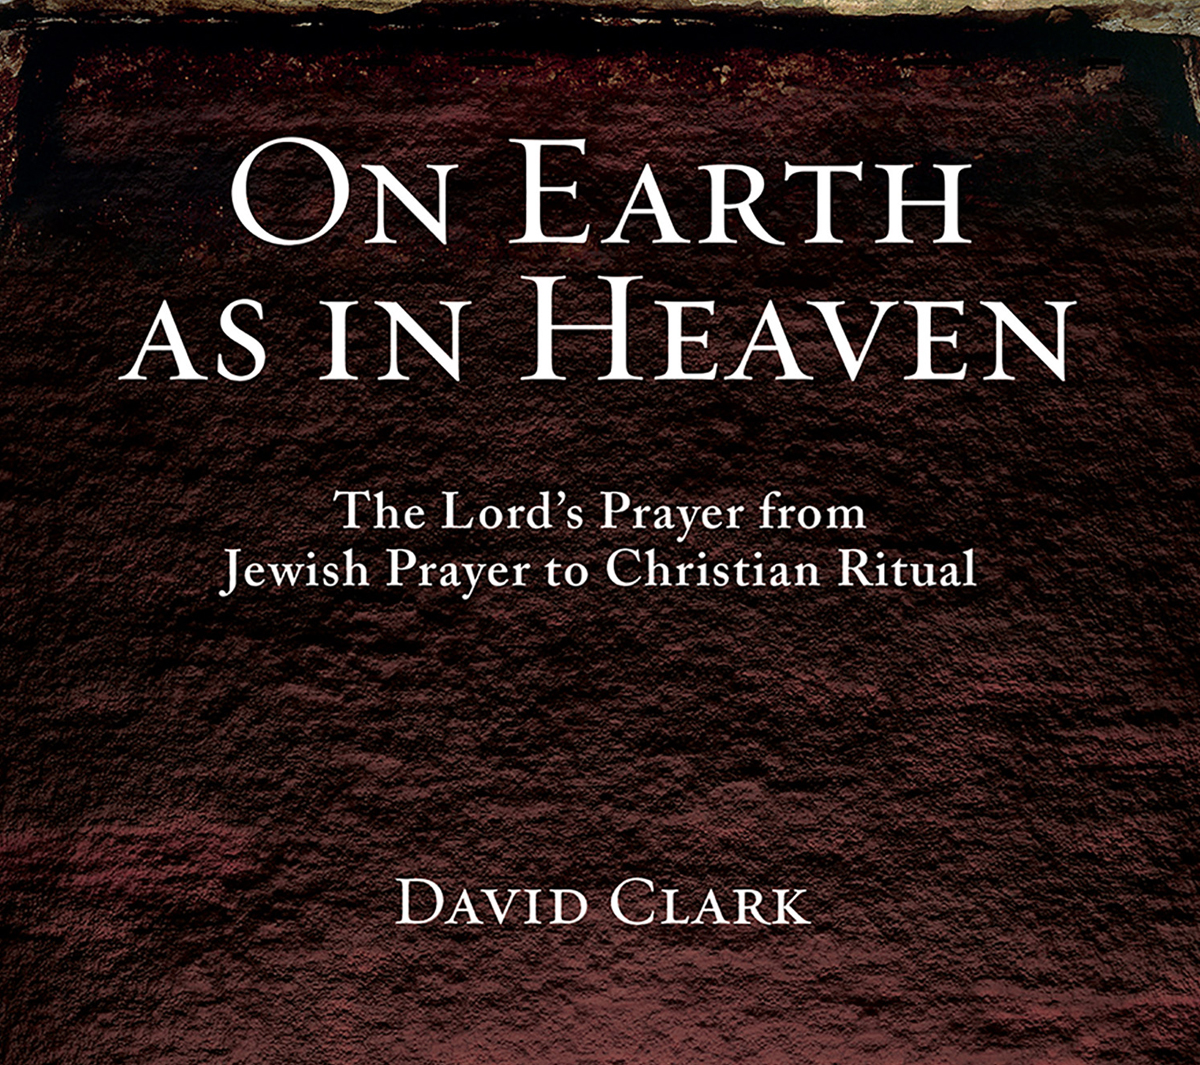 On Earth as in Heaven: The Lord's Prayer from Jewish Prayer to Christian Ritual